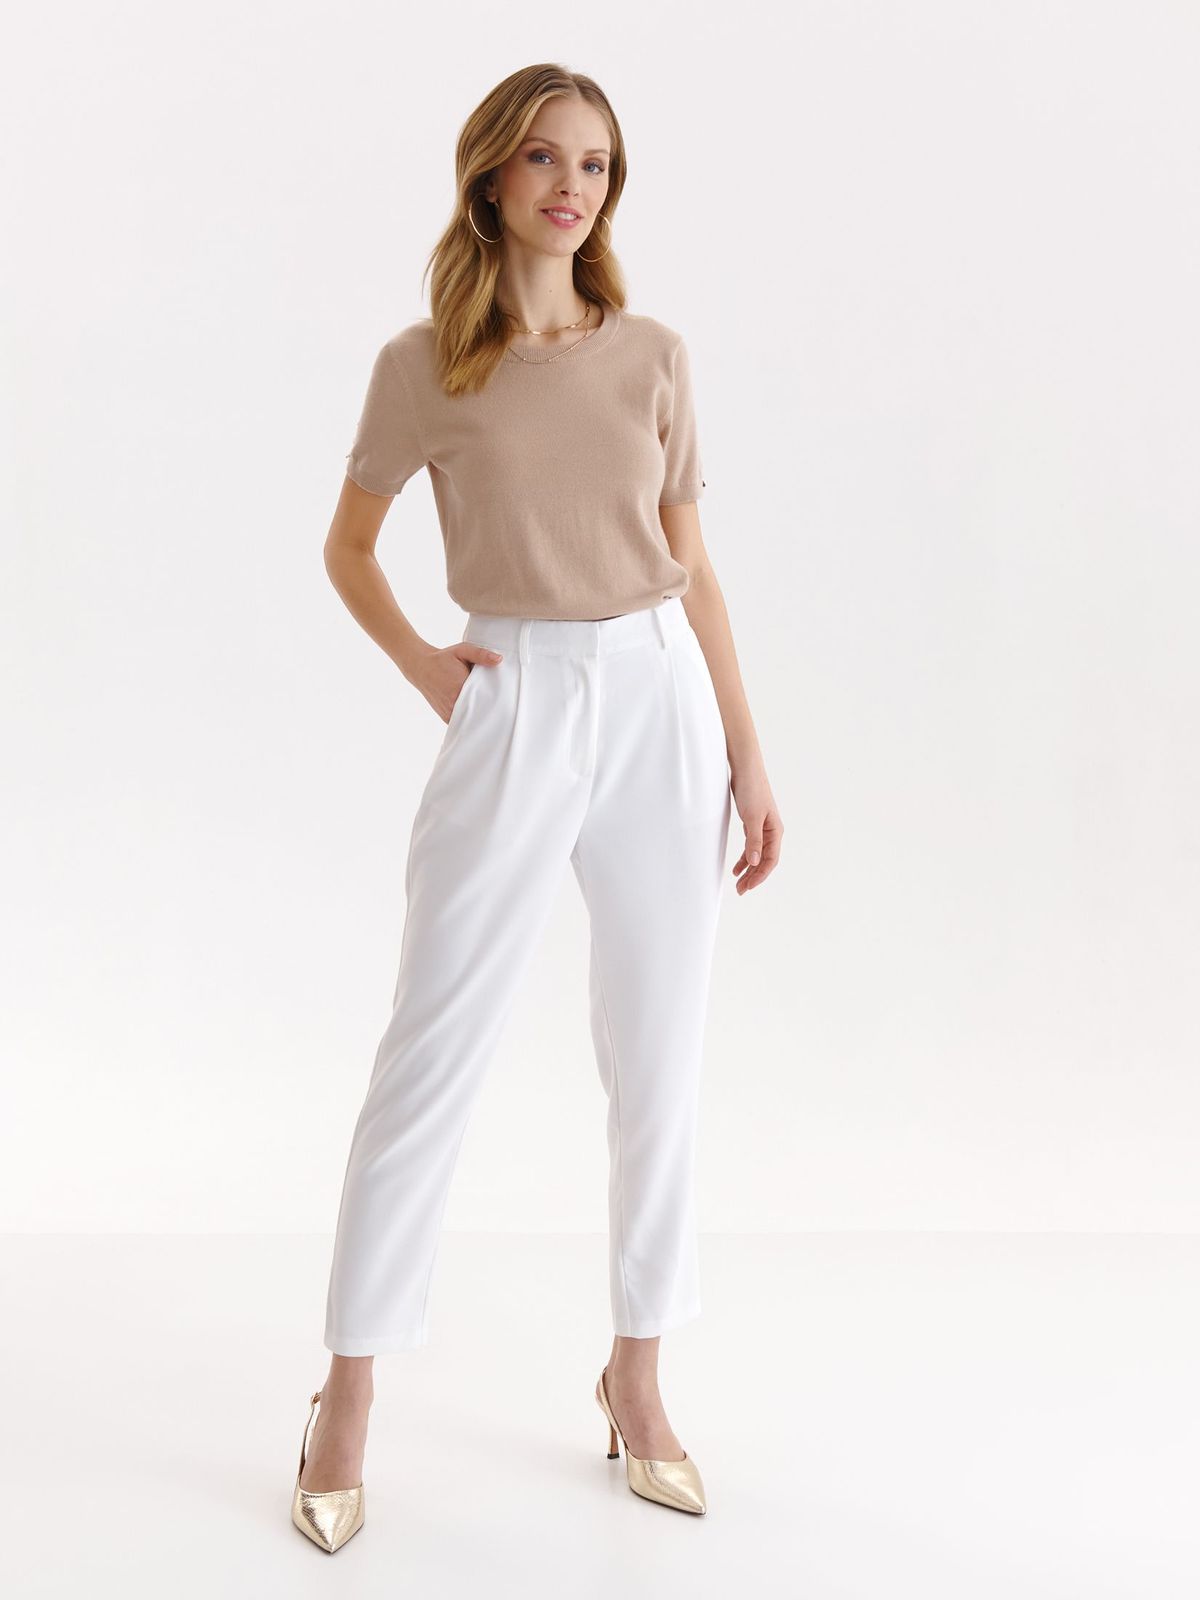 White trousers conical high waisted thin fabric lateral pockets 1 - StarShinerS.com